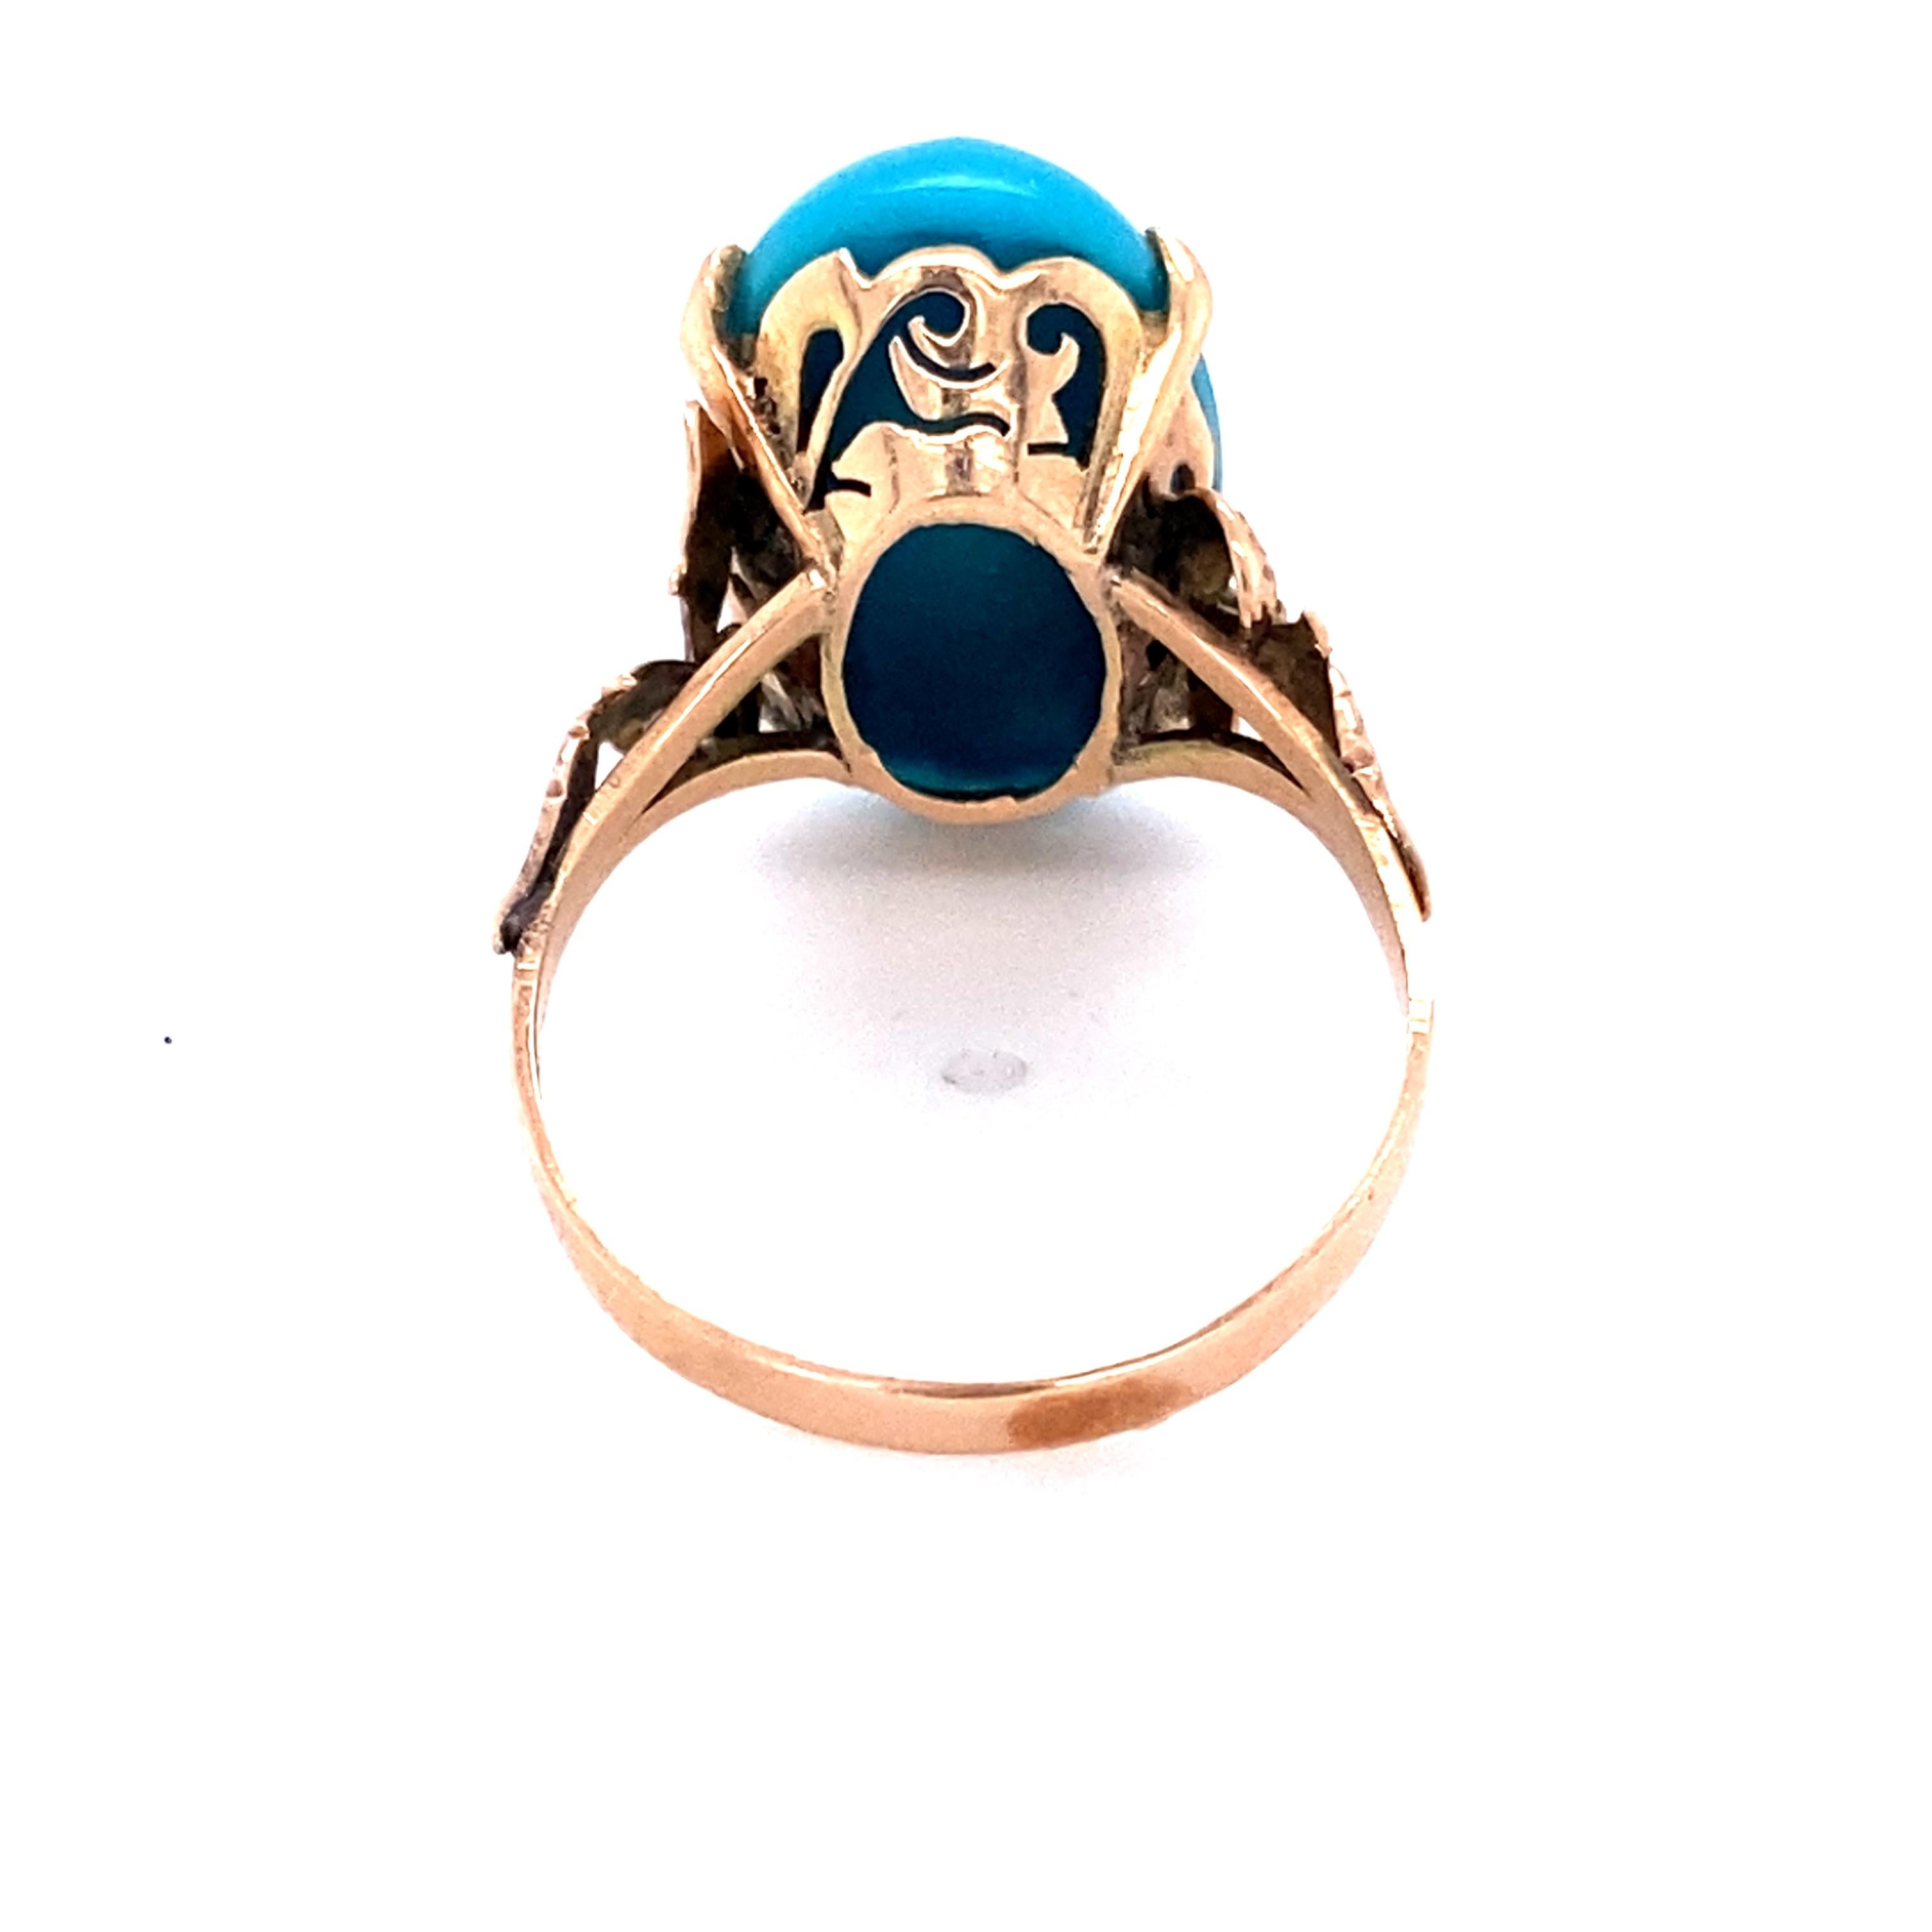 Oval Cut 1930s Ornate Turquoise Ring in 9 Karat Rose Gold